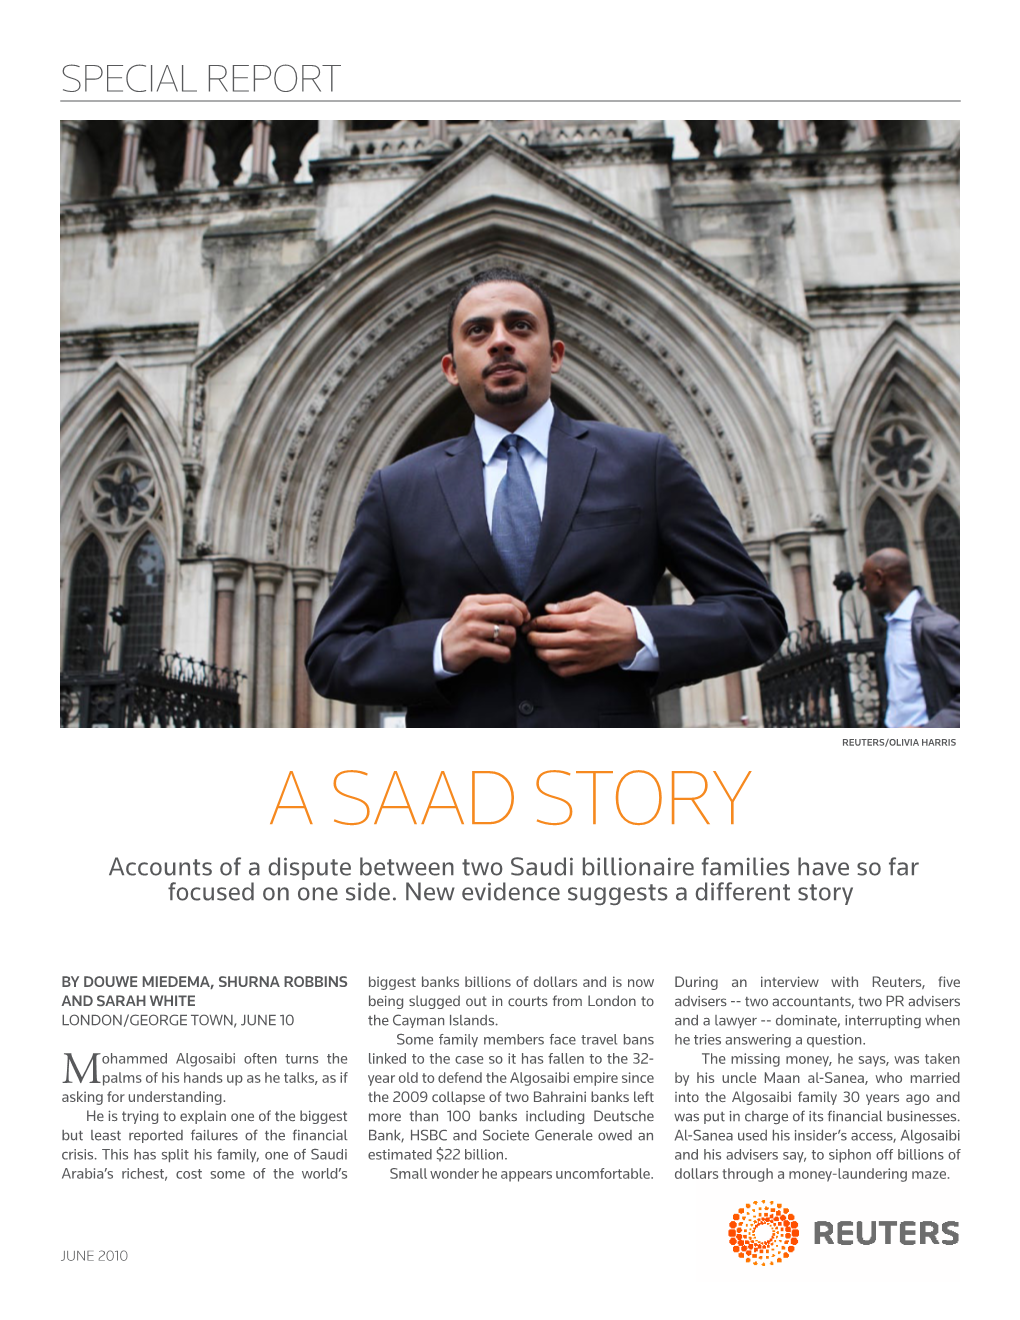 A SAAD STORY Accounts of a Dispute Between Two Saudi Billionaire Families Have So Far Focused on One Side